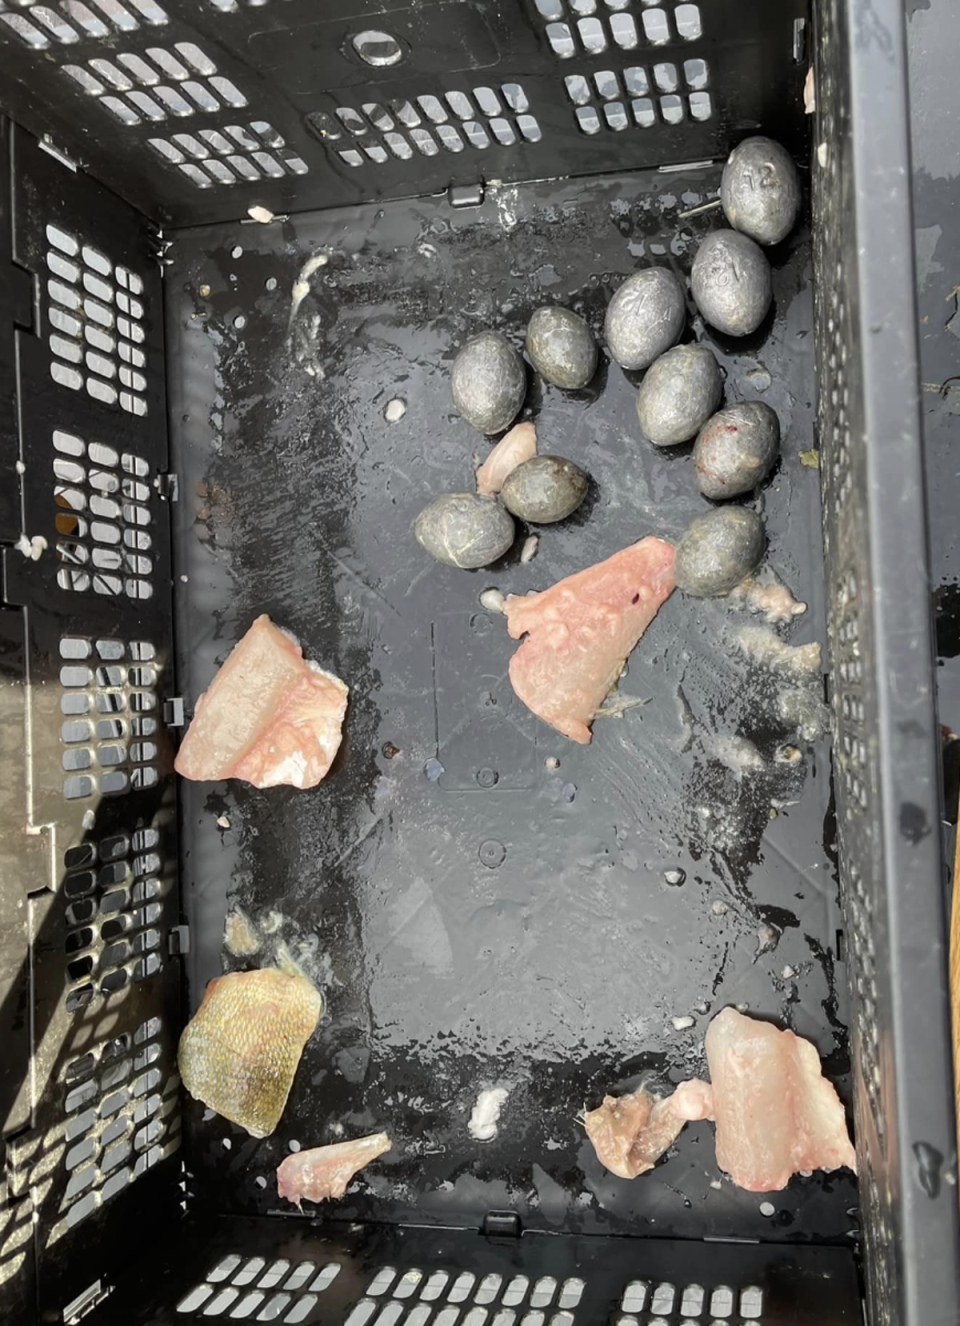 Lead weights and fillets stuffed inside the fish (Lake Erie Walleye Trial)